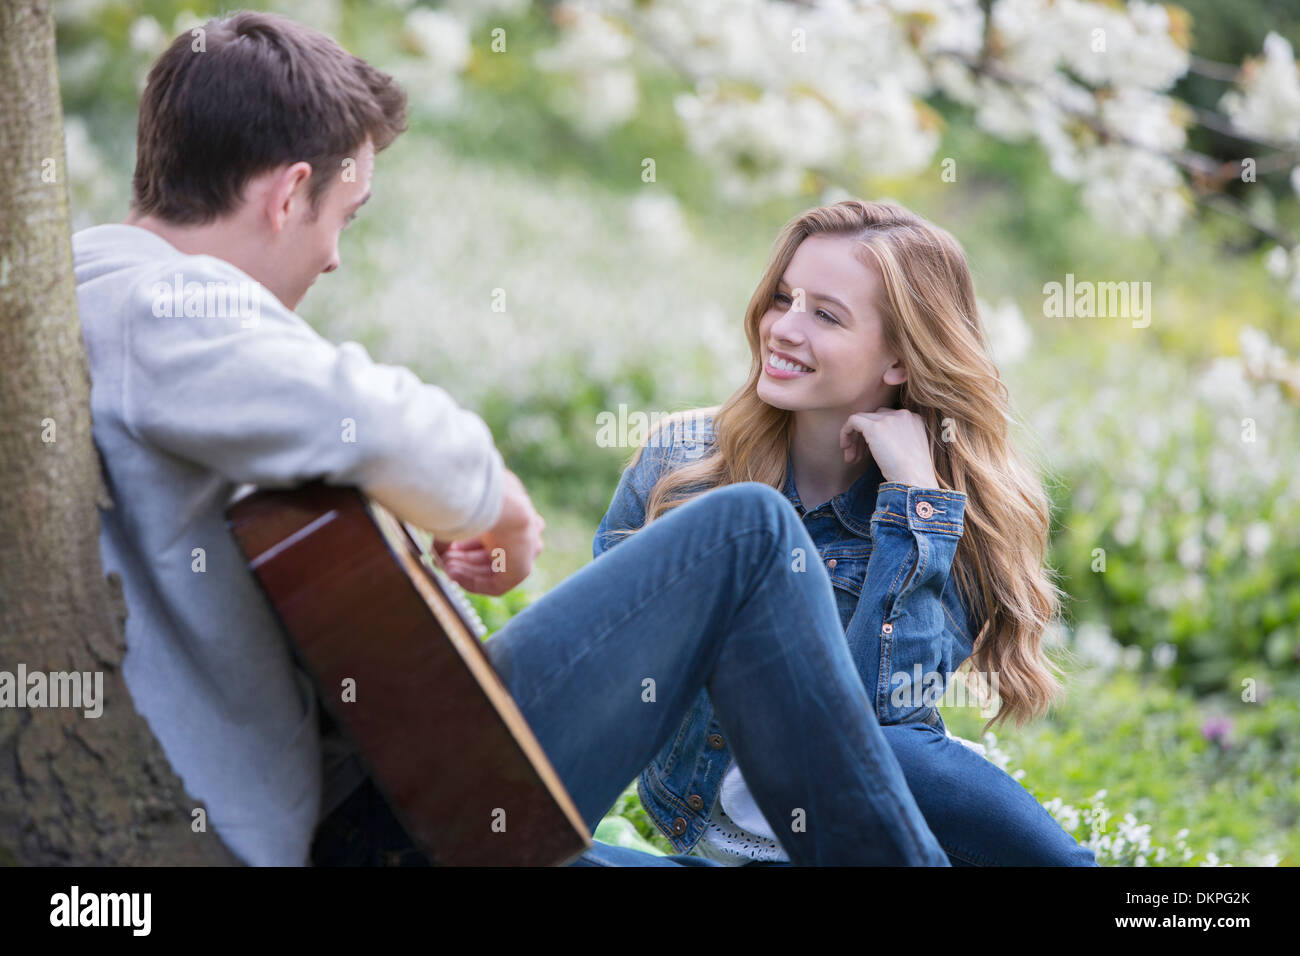 Man playing guitar for girlfriend outdoors Stock Photo